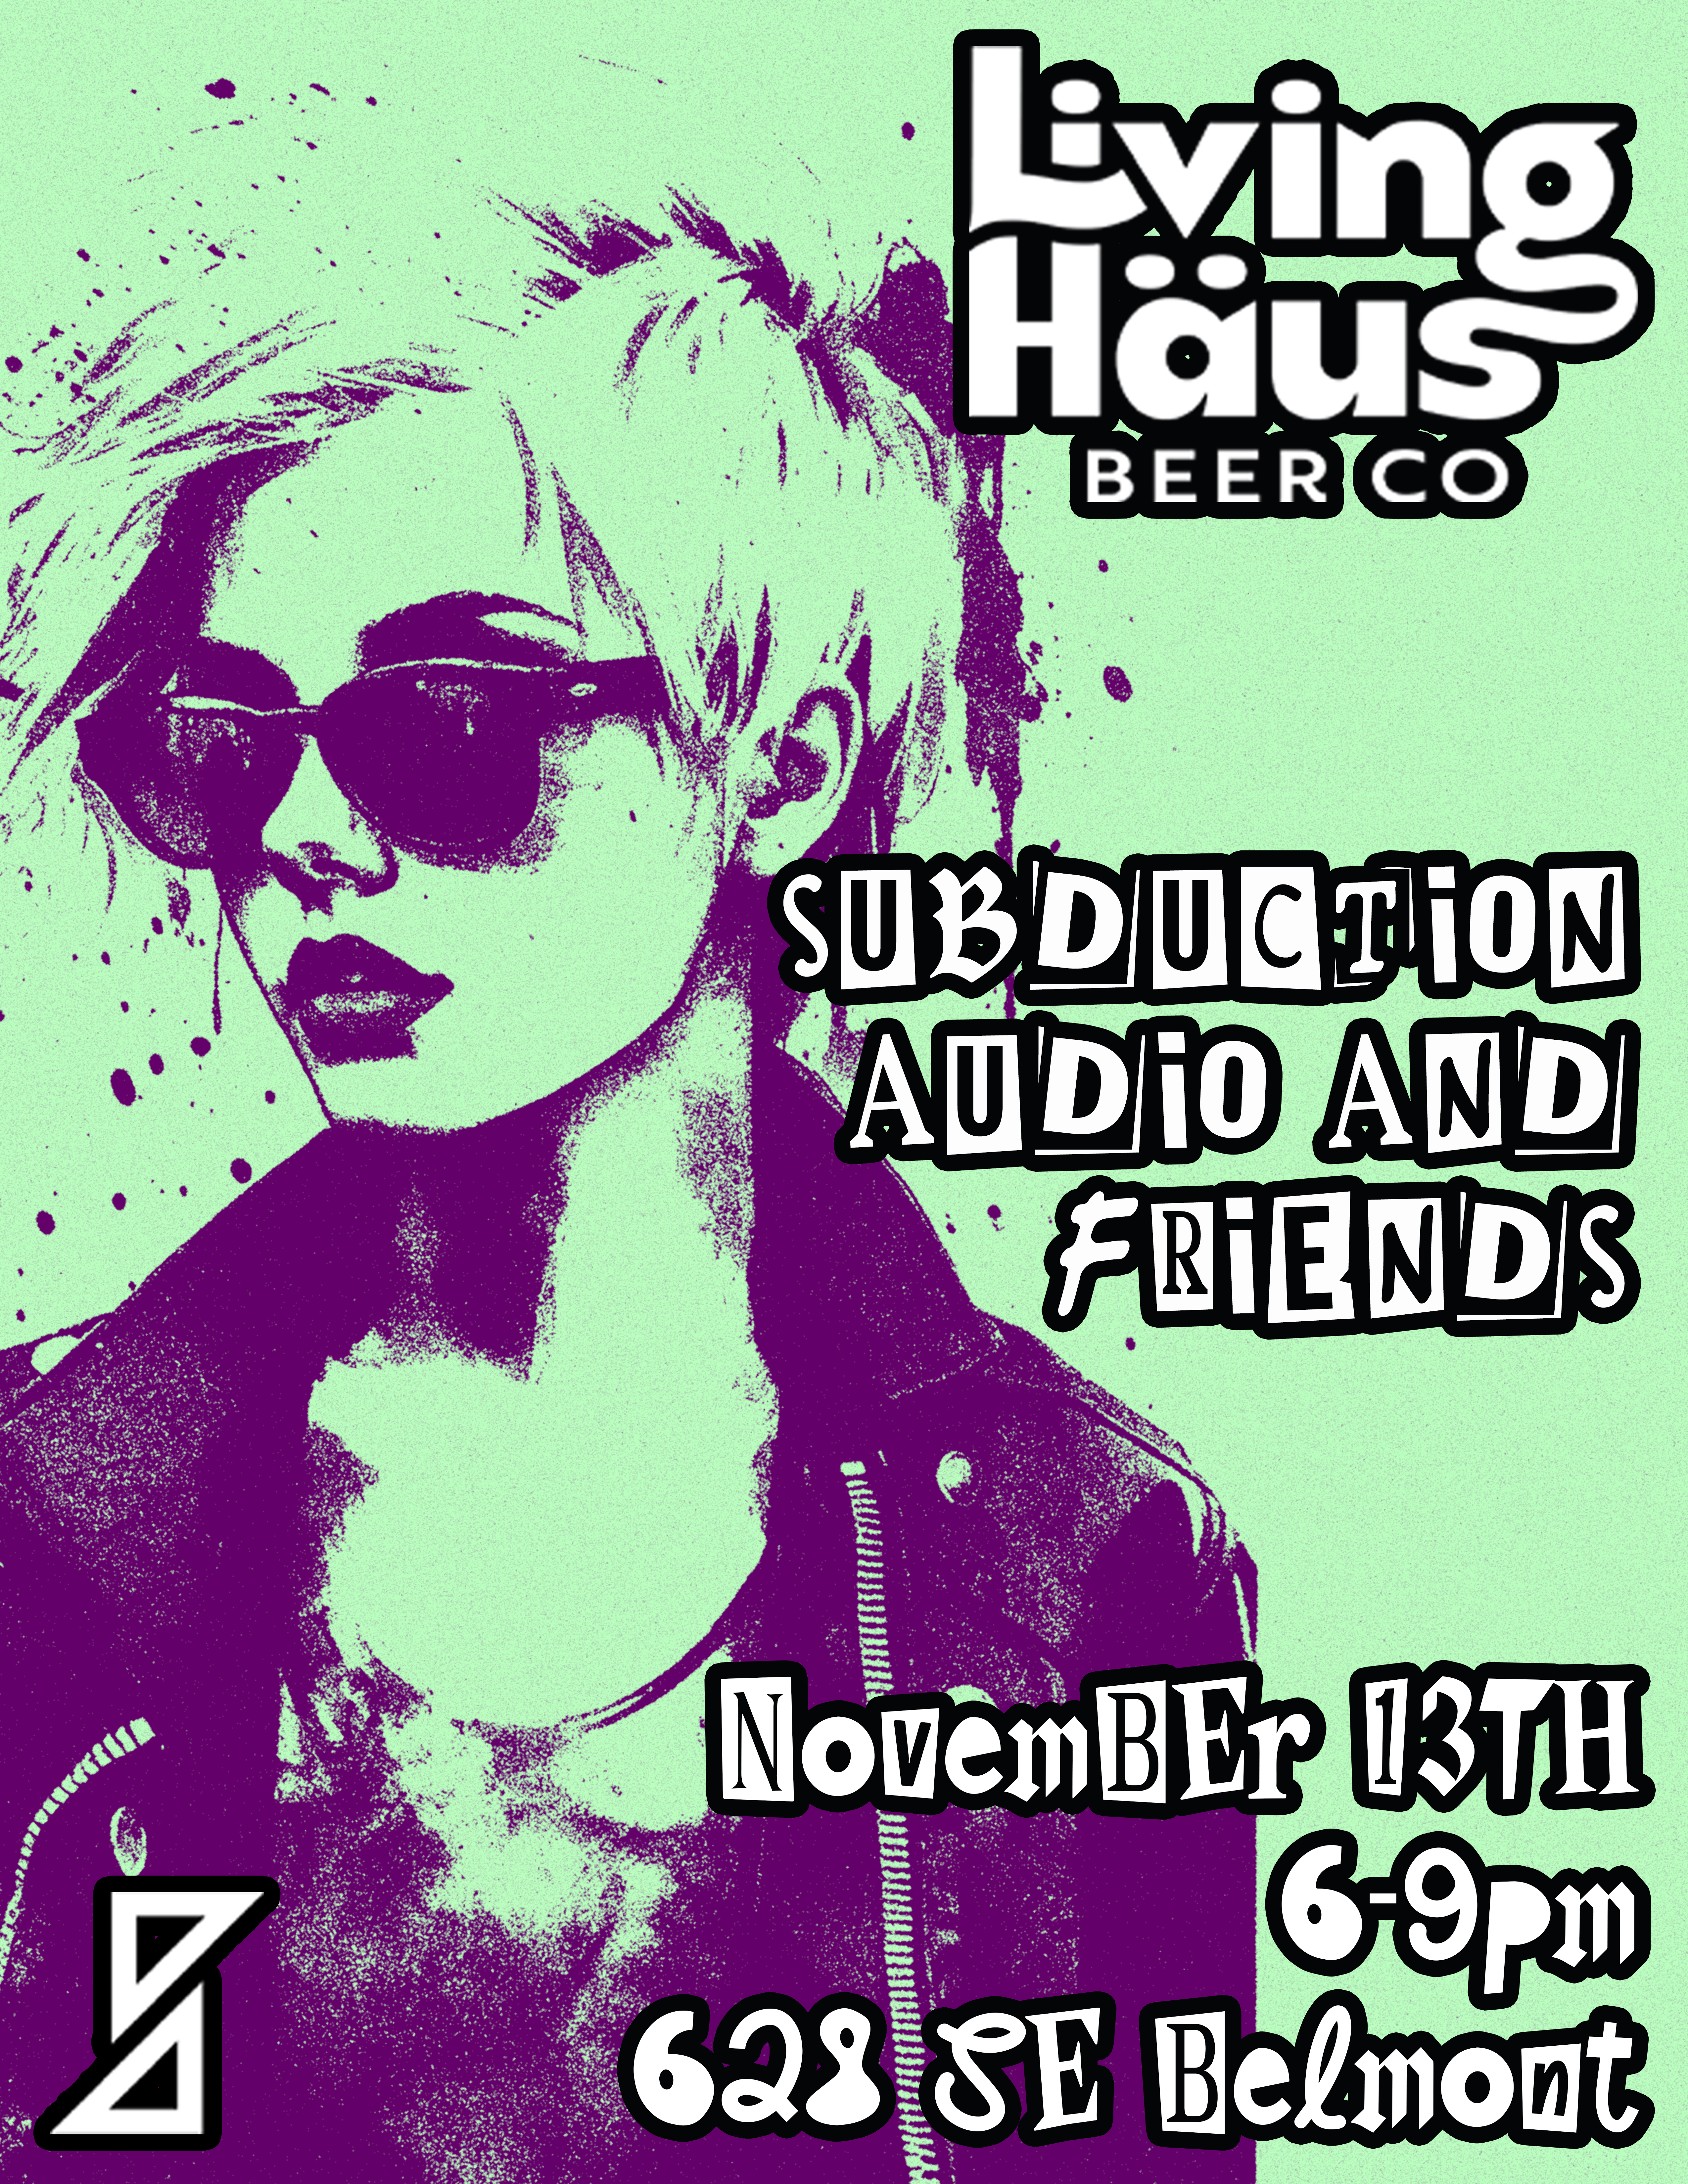 Subduction Audio and Friends 15